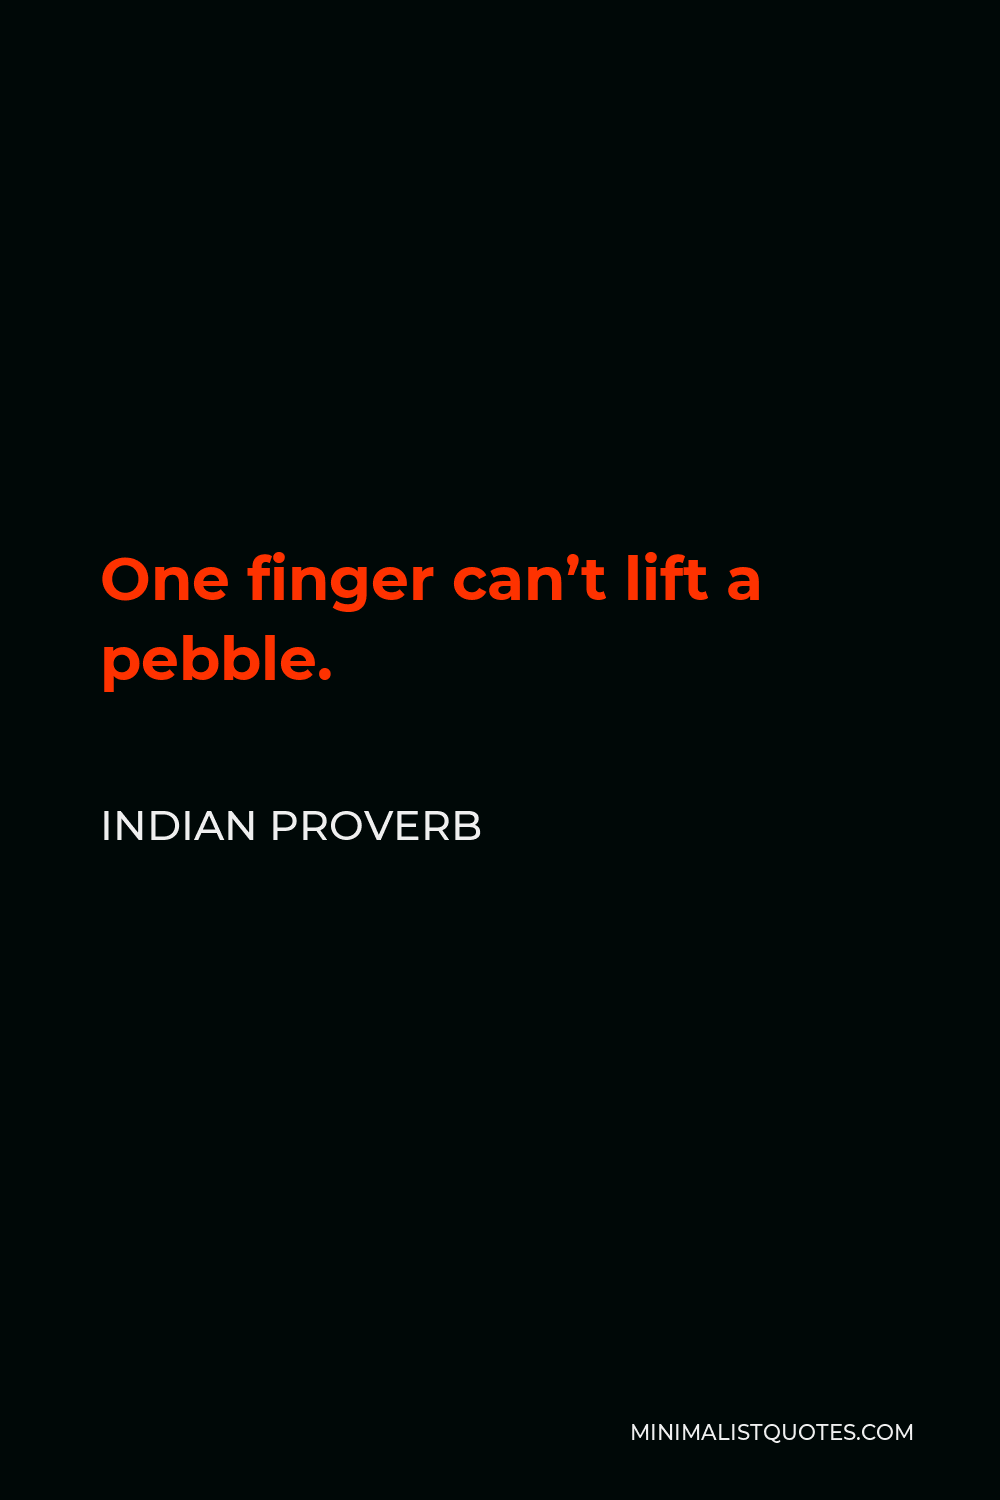 Indian Proverb Quote - One finger can’t lift a pebble.